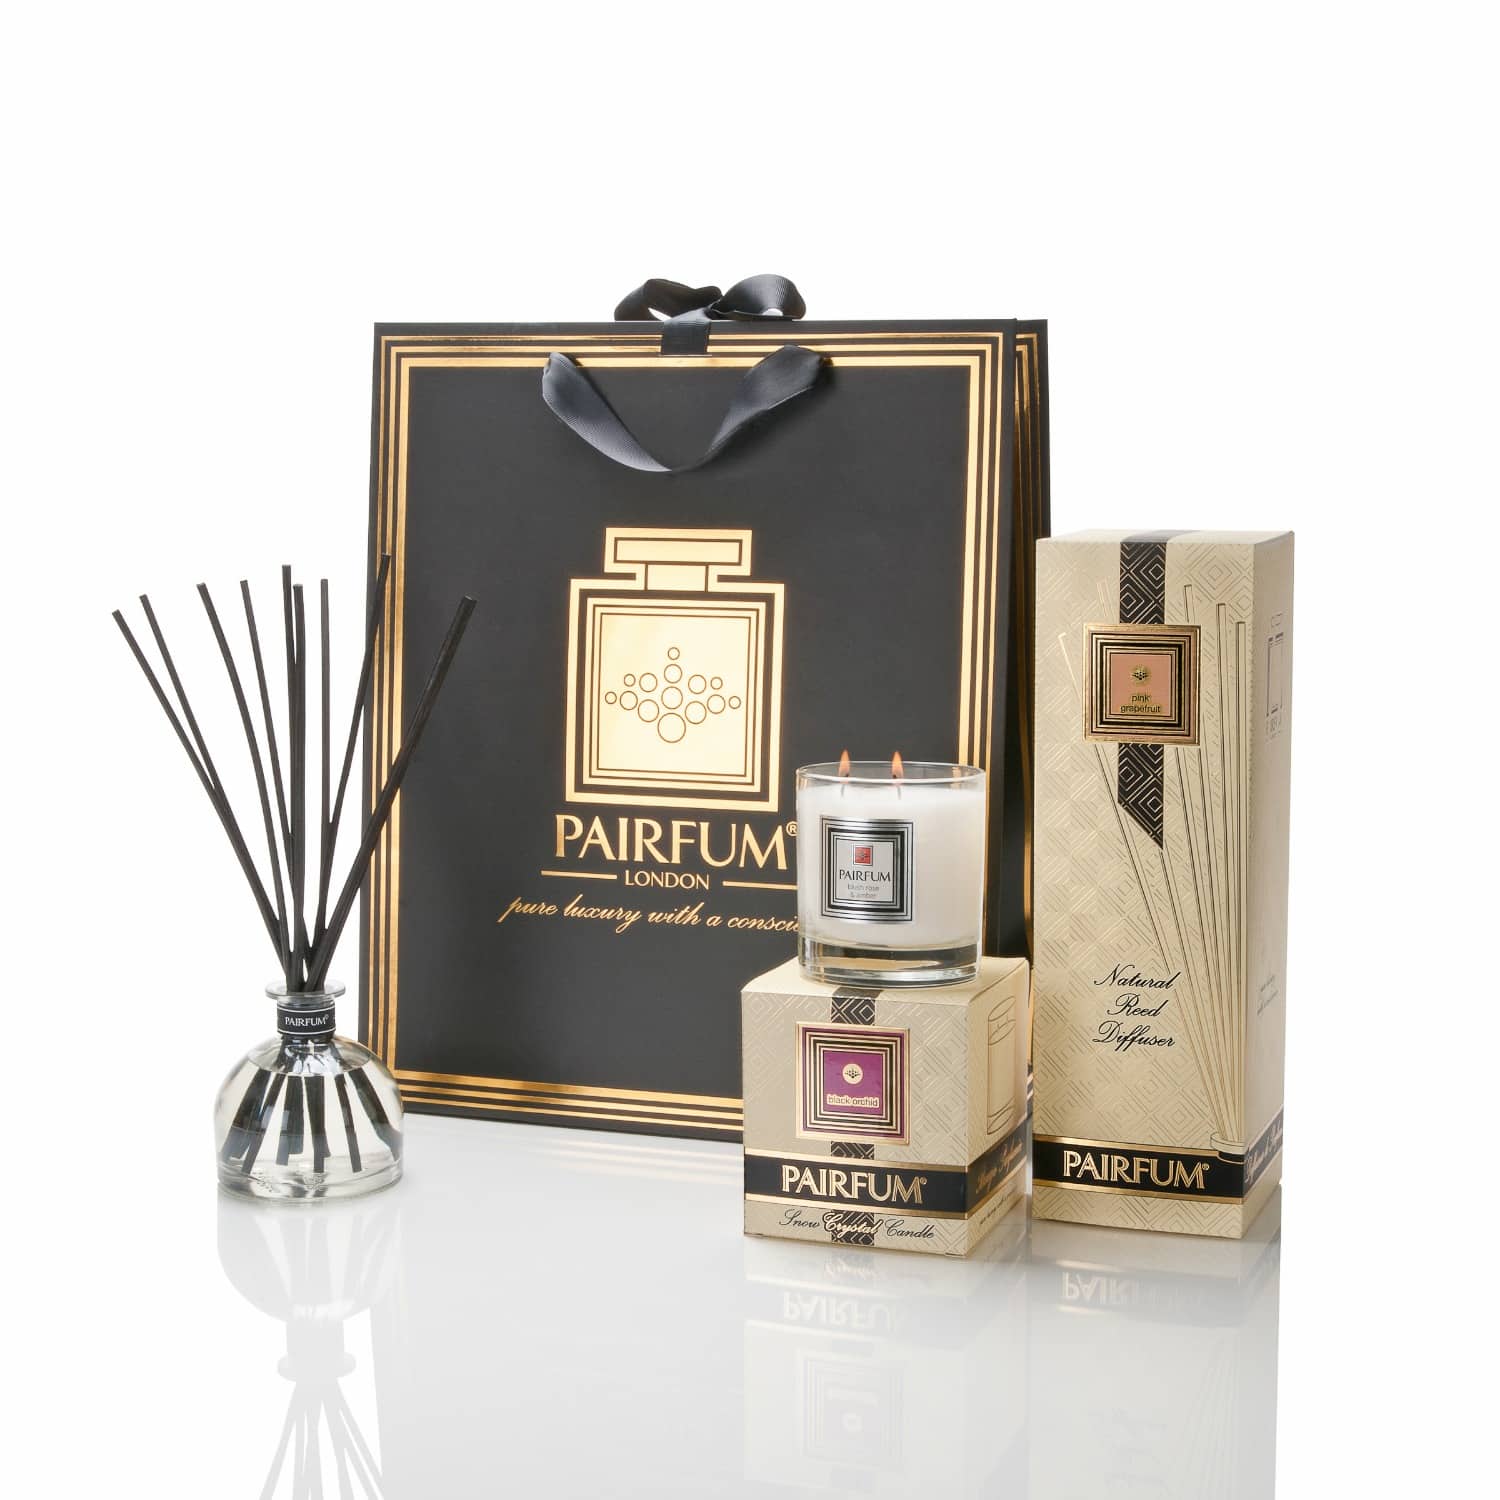 Home Perfume - Home Fragrance - At Home - Products